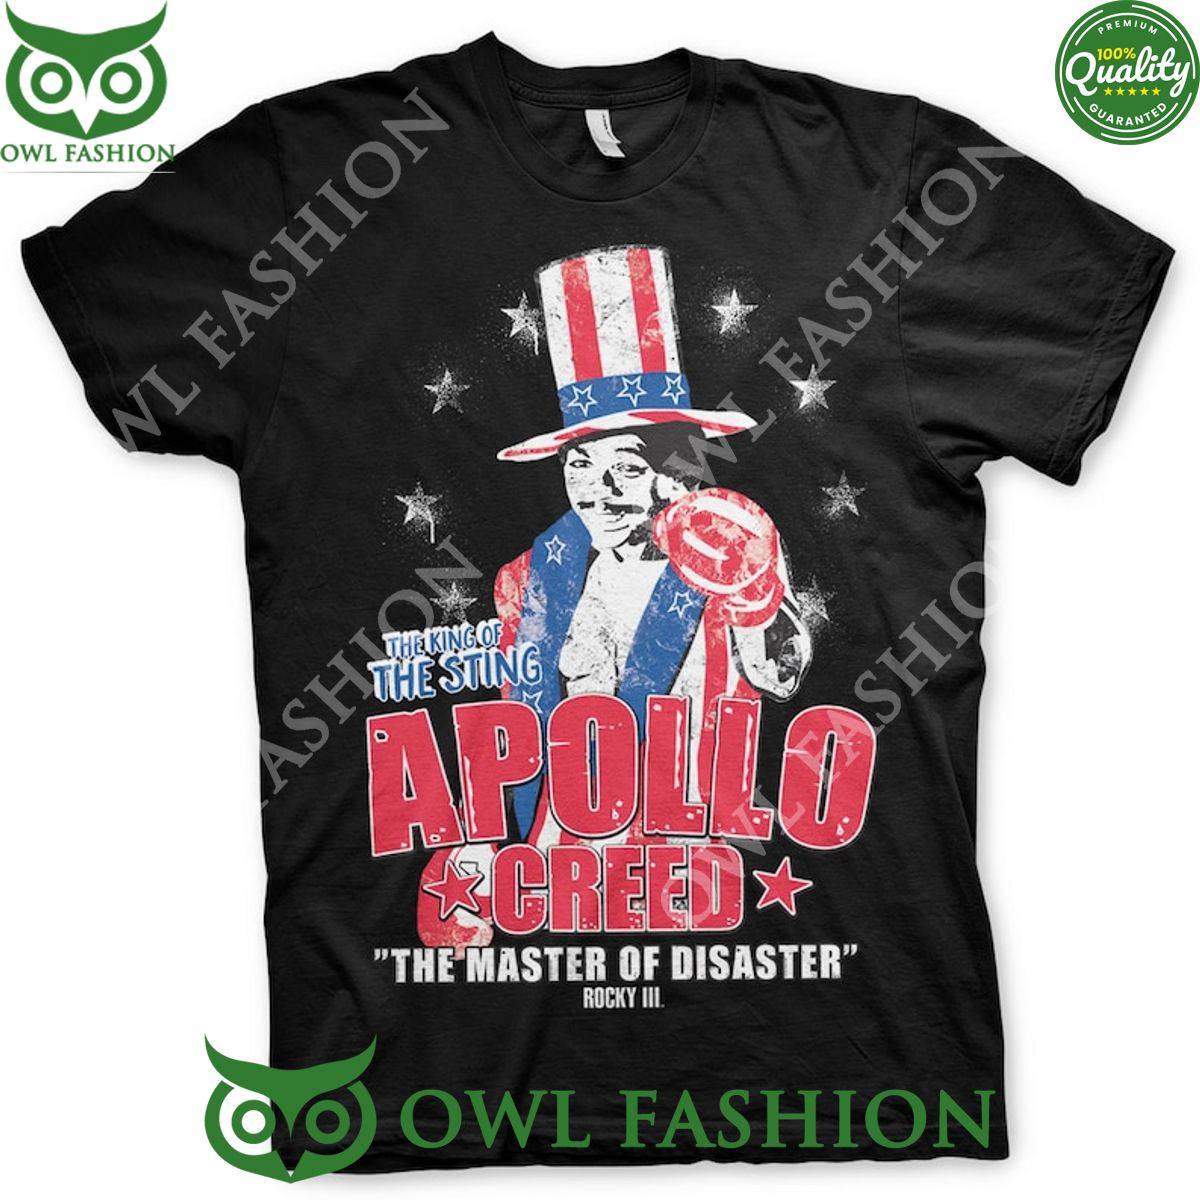 Rocky III Apollo Creed Carl Weathers RIP The King of the sting the master of disaster T Shirt